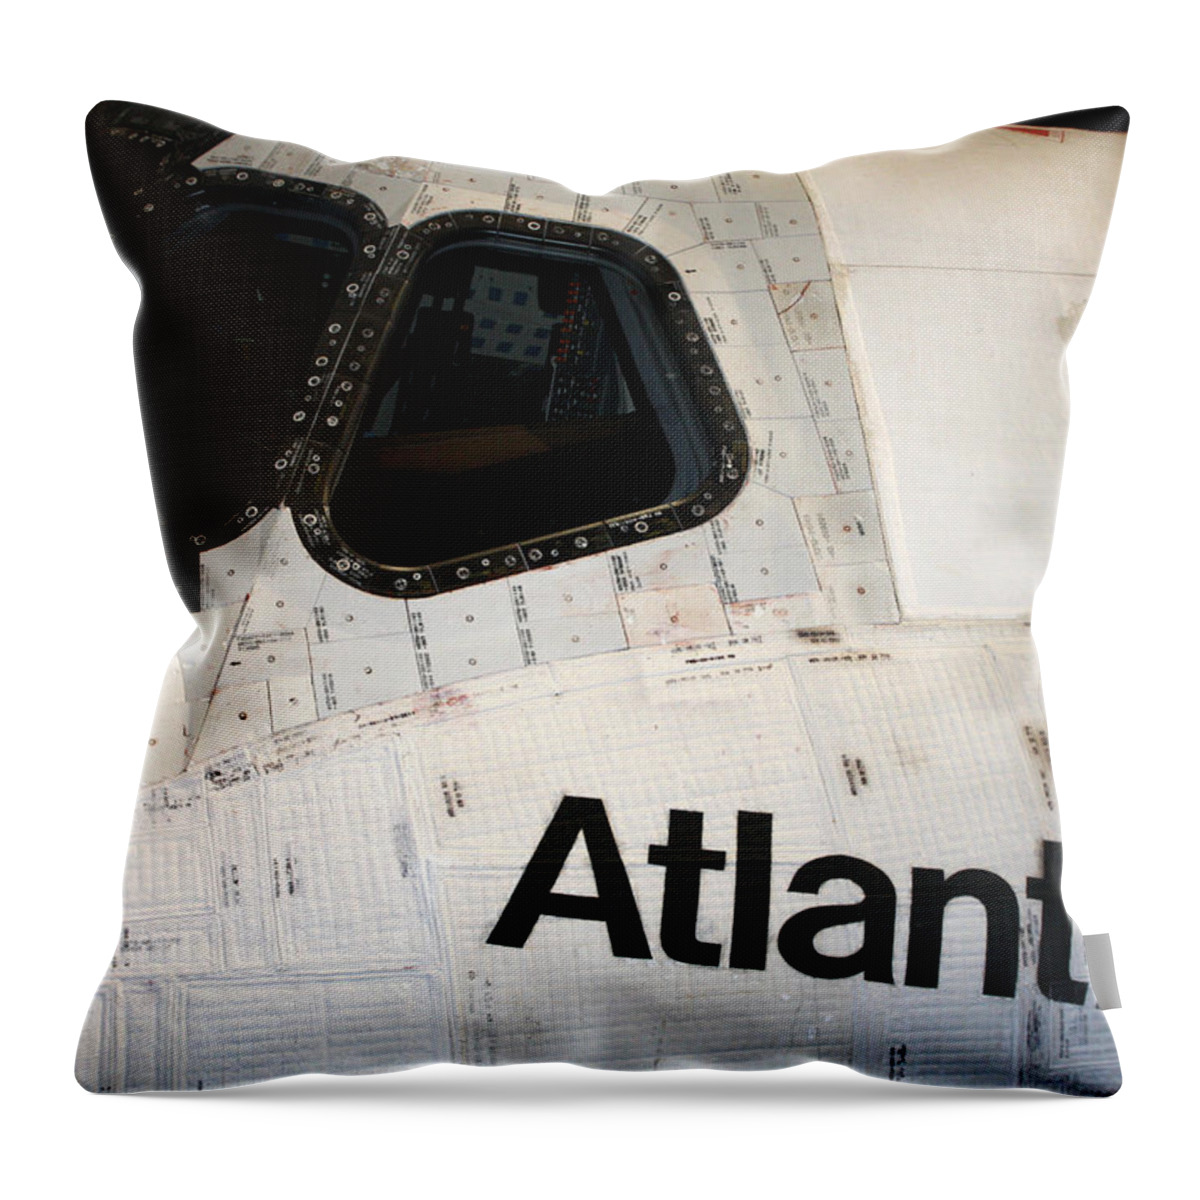 Kennedy Space Center Throw Pillow featuring the photograph Atlantis Up Close by David Nicholls